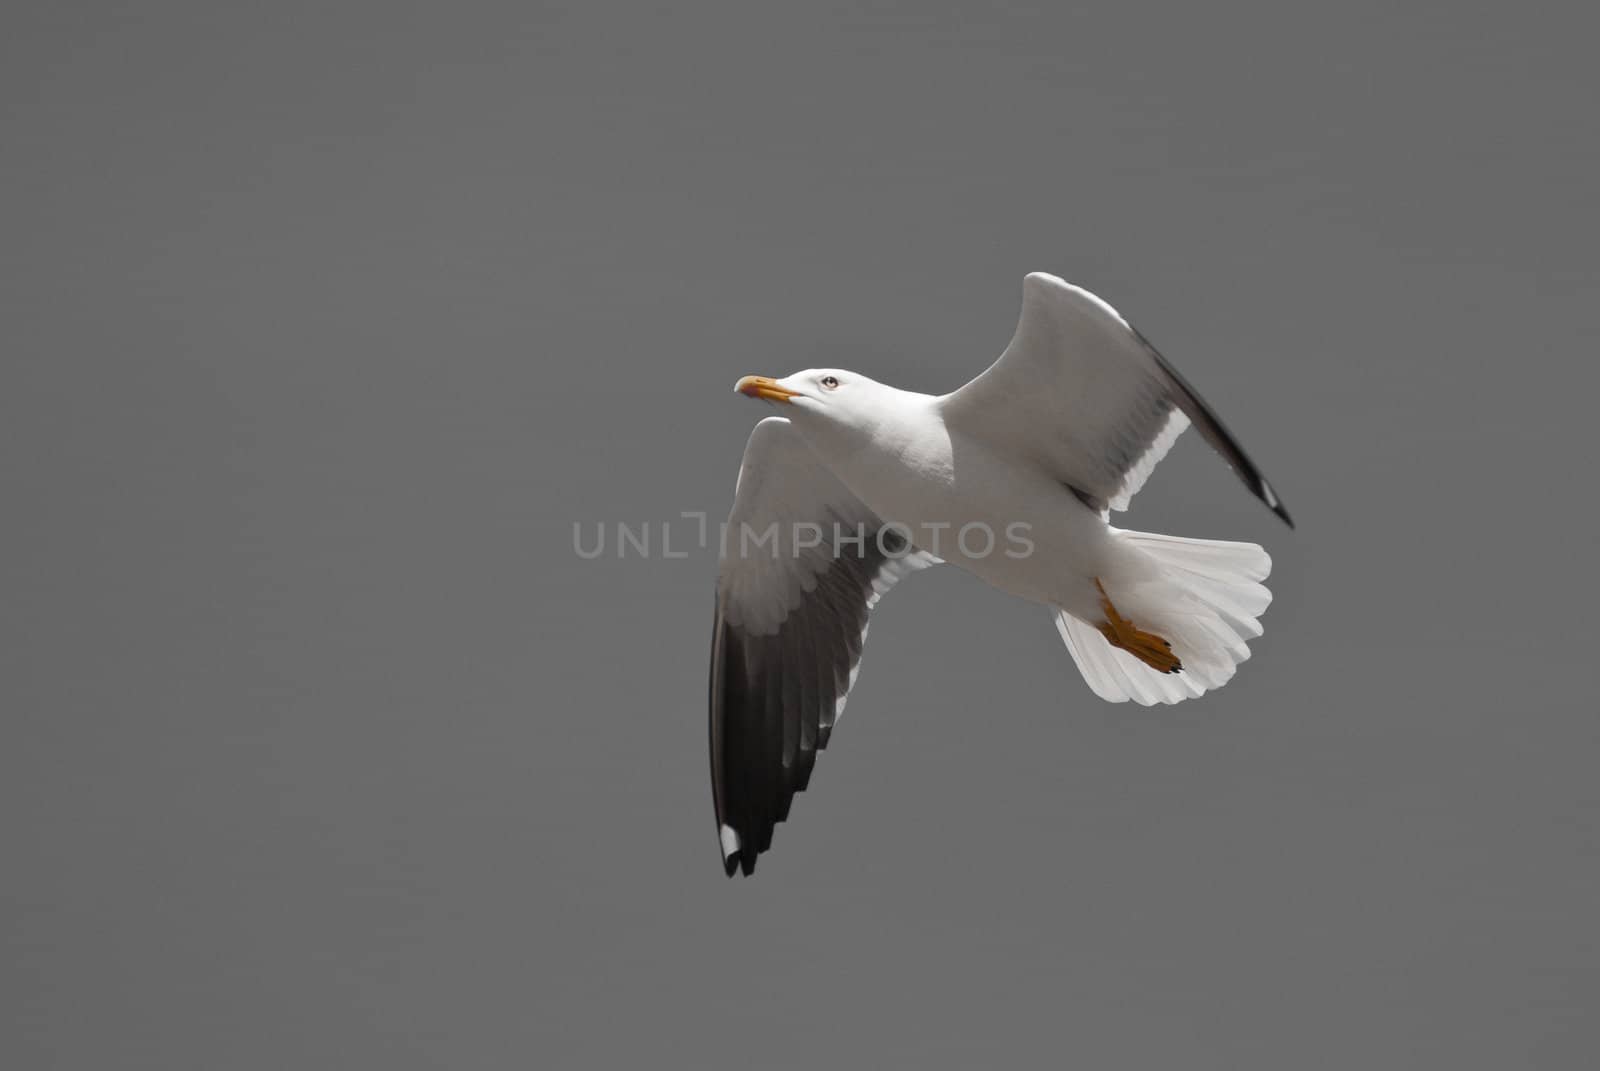 a digitally altered image of a flying seagull